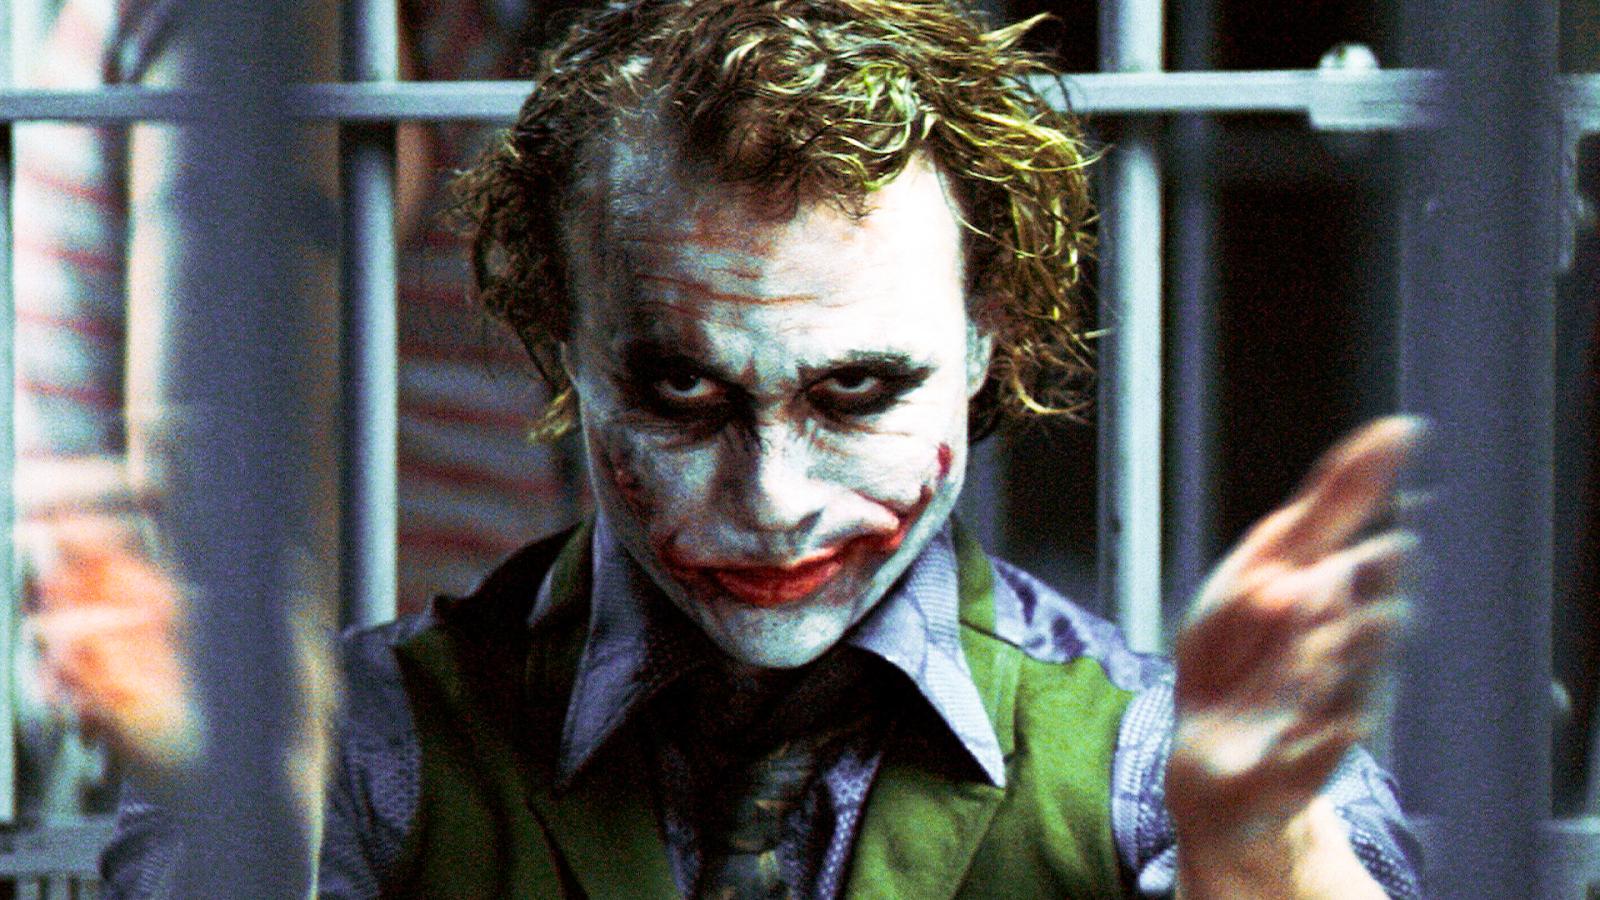 Who Dark Knight’s Joker Really Was? This Wild Theory Gives a Surprising Answer - image 1